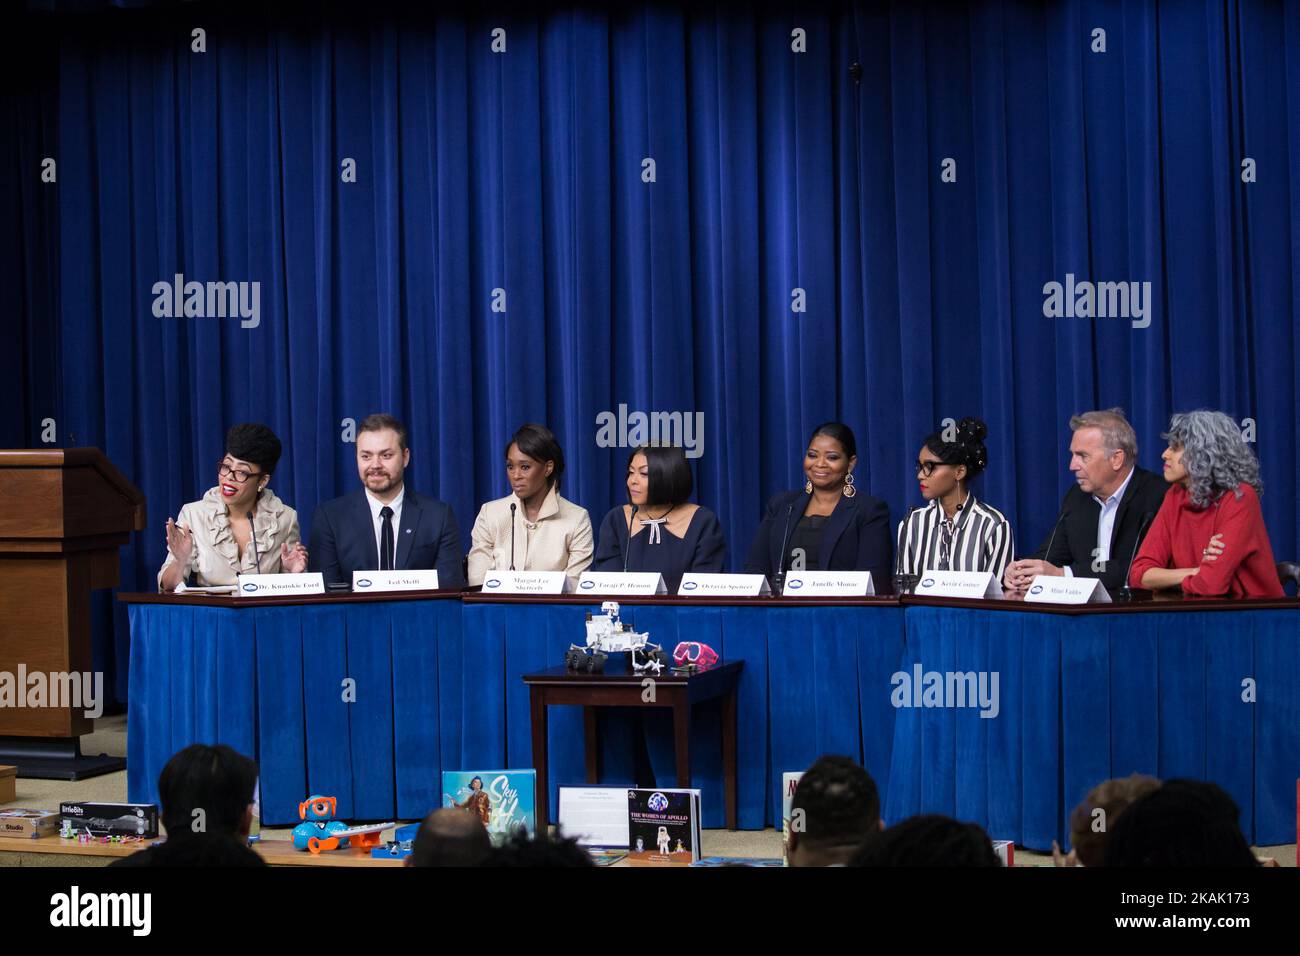 On Thursday, December 15th, in the South Court Auditorium of the Eisenhower Executive Office Building of the White House, (l-r) Dr. Knatokie Ford, Senior Policy Advisor, White House Office of Science and Technology Policy, 'Hidden Figures' director Ted Melfi, author Margot Lee Shetterly, actress Taraji P. Henson, actress Octavia Spencer, actress Janelle Monae, actor Kevin Costner, and producer Mimi ValdÃ©s, speak on a panel about the film, Â“Hidden FiguresÂ”, a biographical film that tells the story of NASA pioneers Katherine Johnson, Dorothy Vaughn, and Mary Jackson, African-American women wh Stock Photo